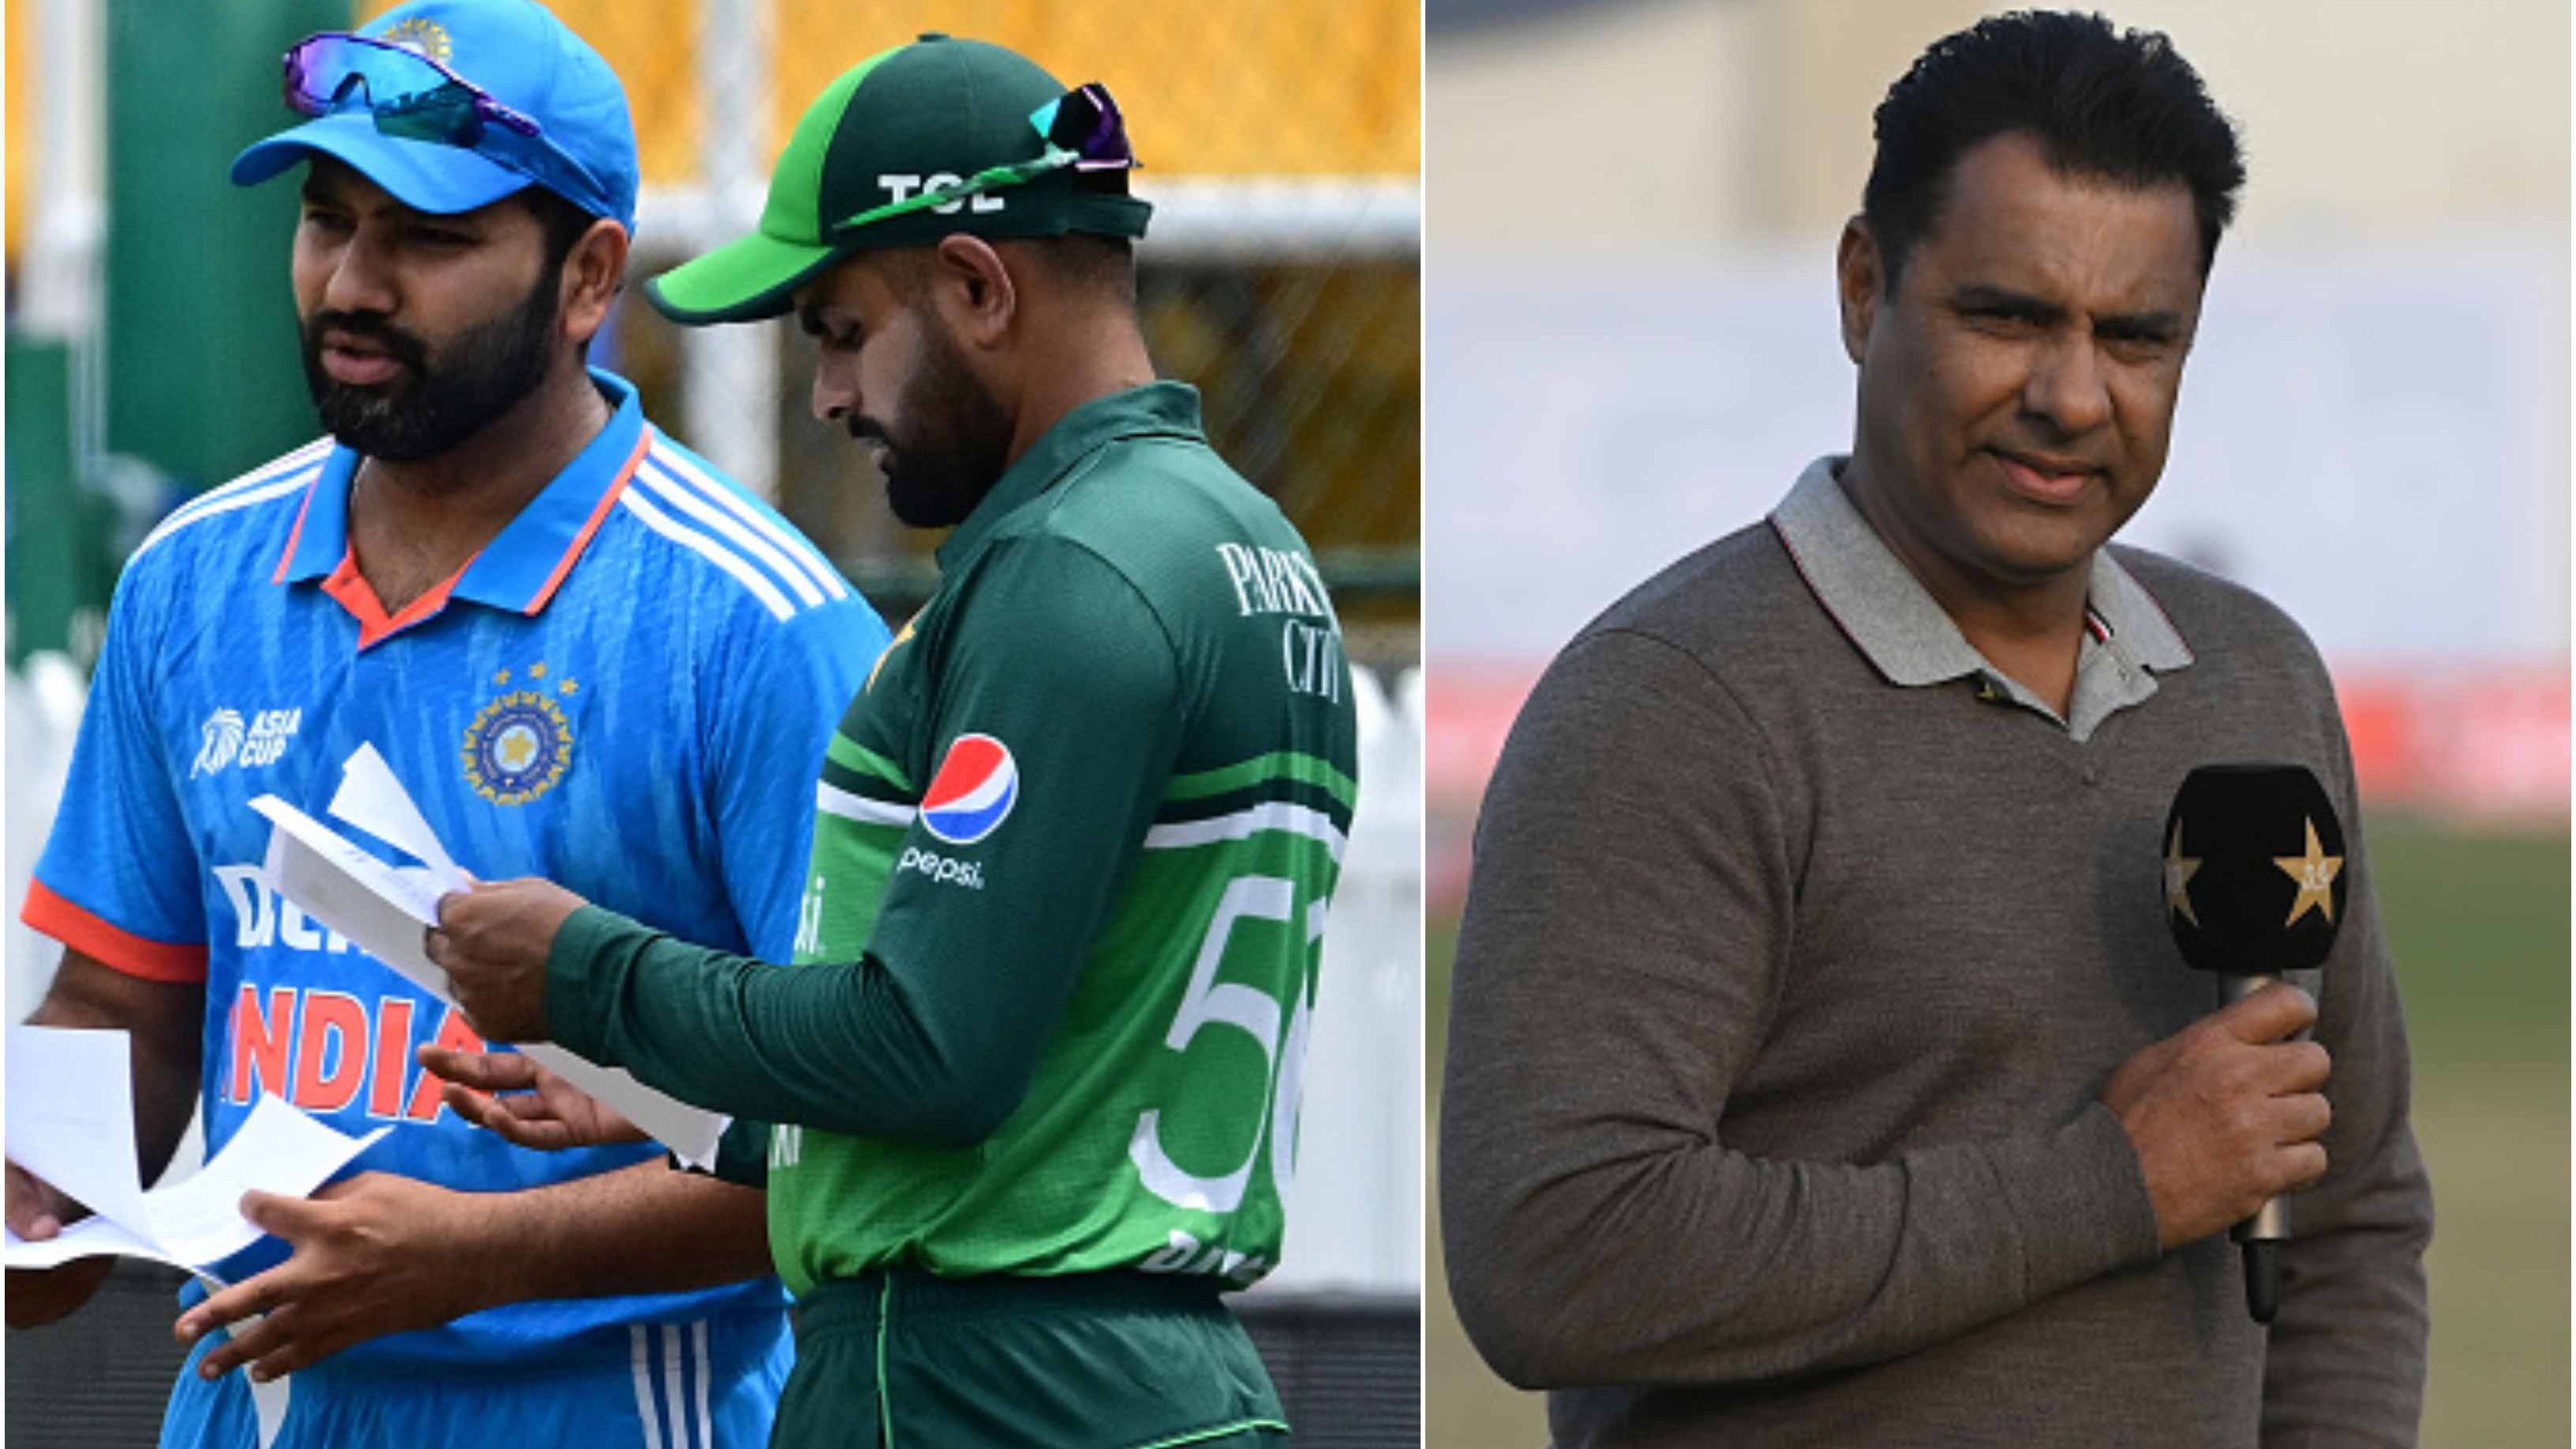 CWC 2023: Waqar Younis calls Pakistan “weaker team as compared to India” ahead of marquee World Cup clash